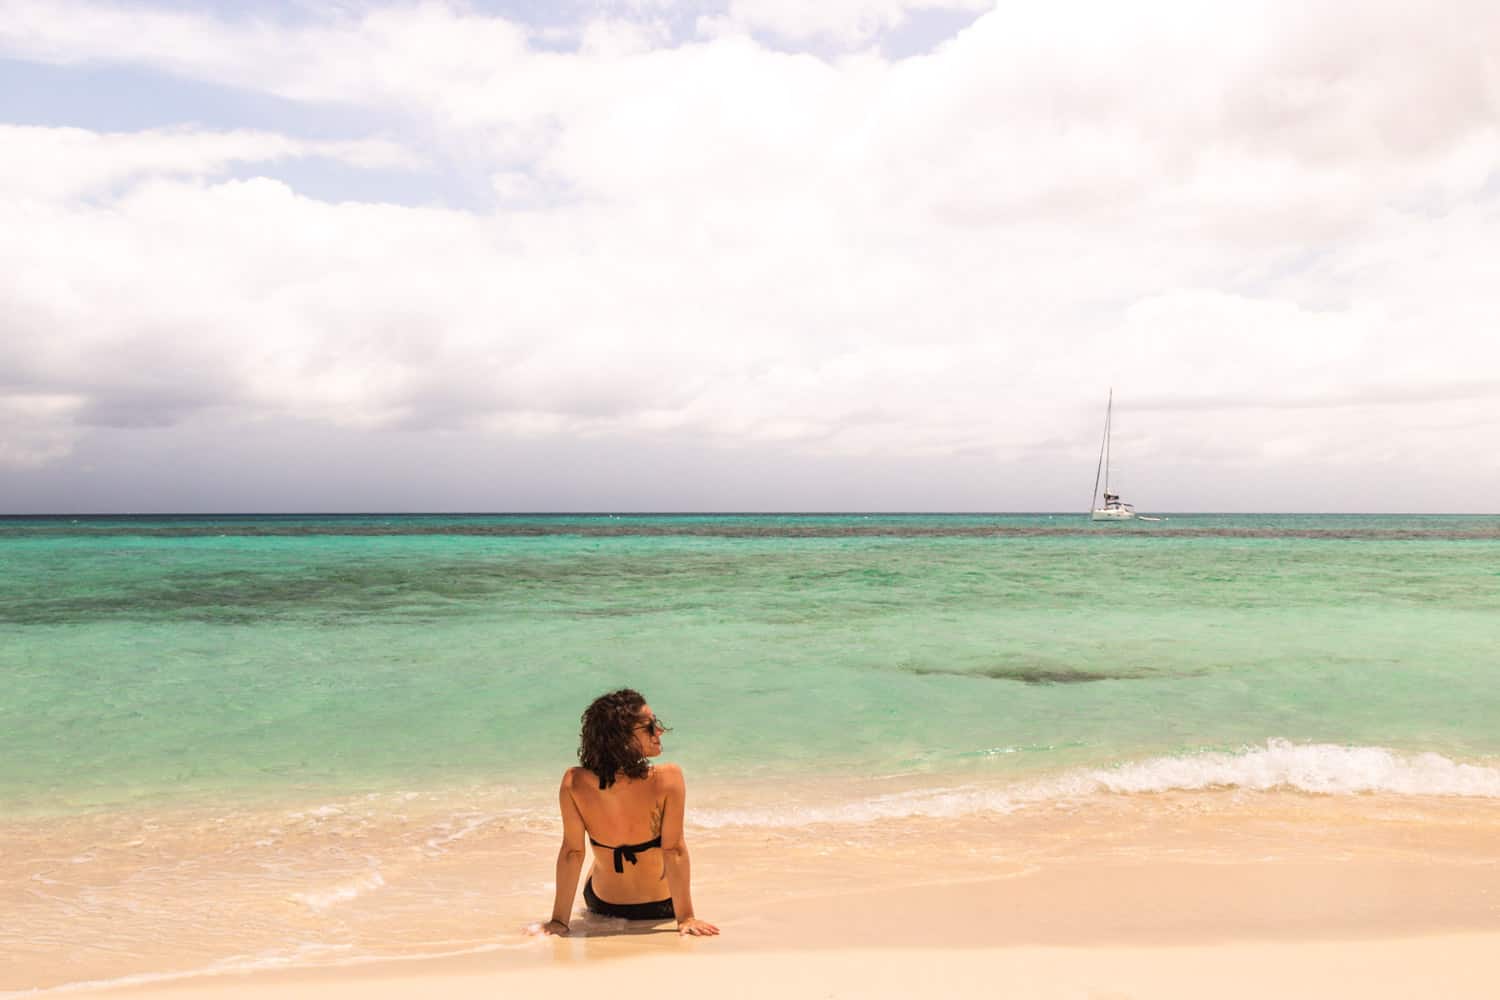 Sandy Island beach in Anguilla with a woman sitting on the beach